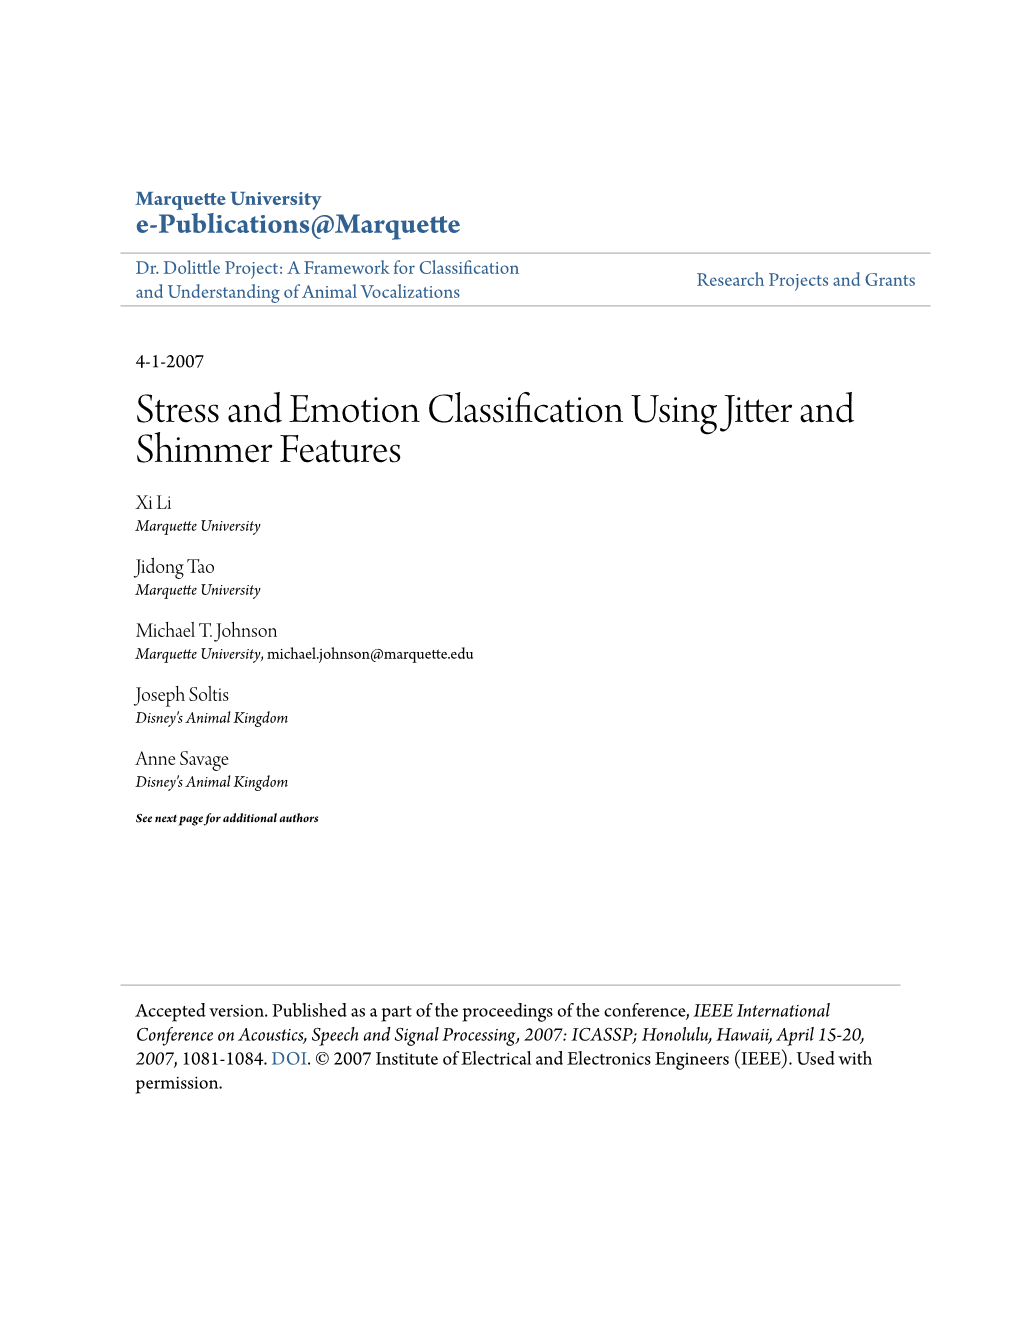 Stress and Emotion Classification Using Jitter and Shimmer Features Xi Li Marquette University